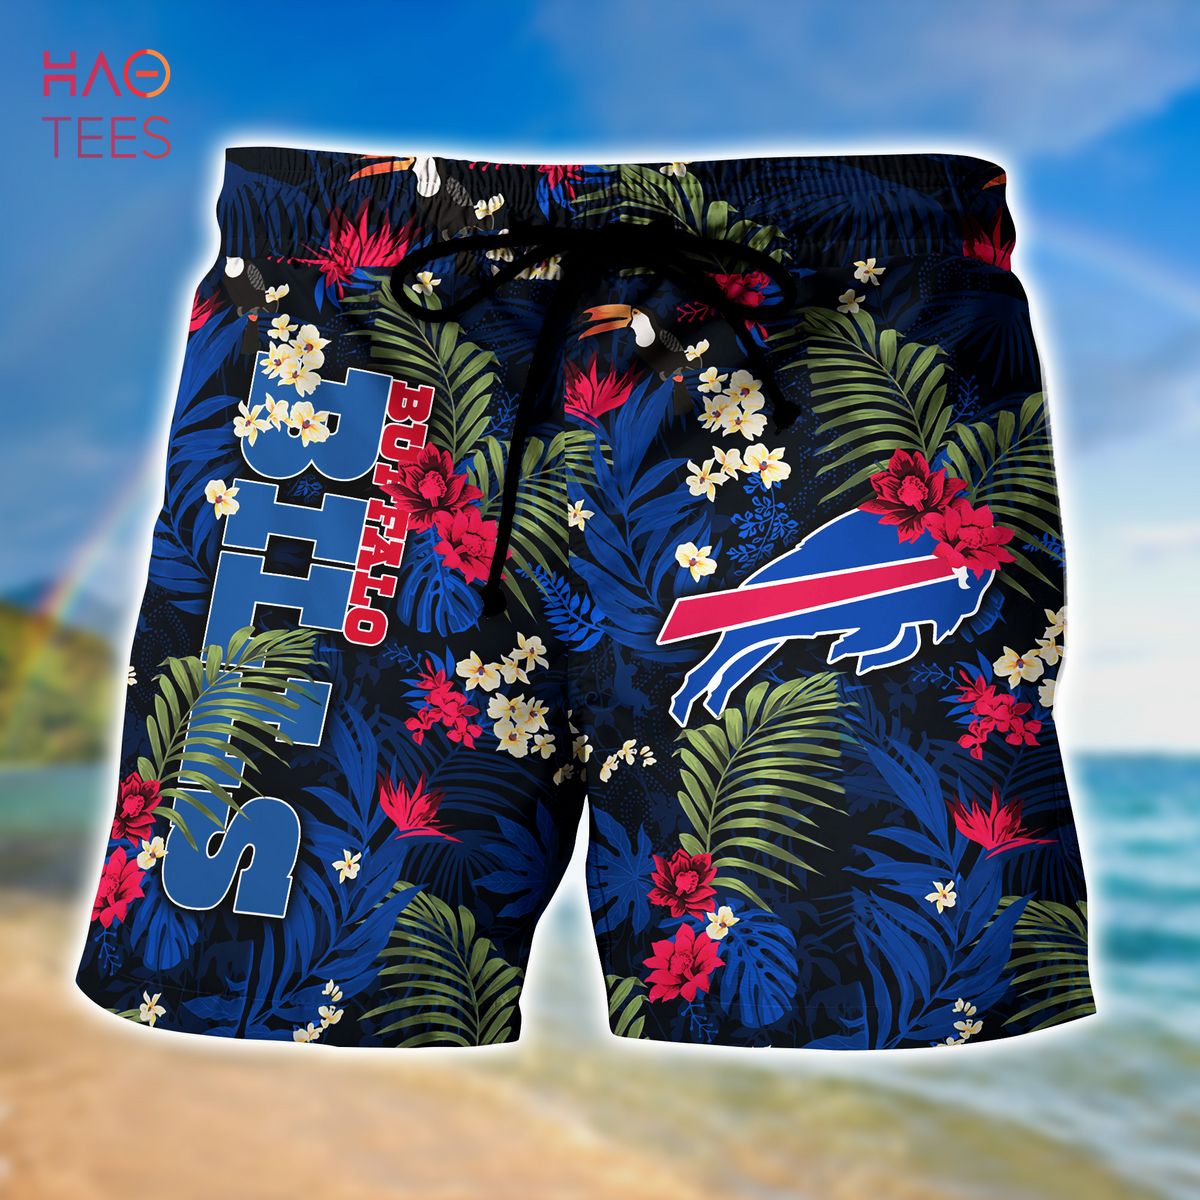 LIMITED] Buffalo Bills NFL-Summer And Shorts, Tropical For Fans